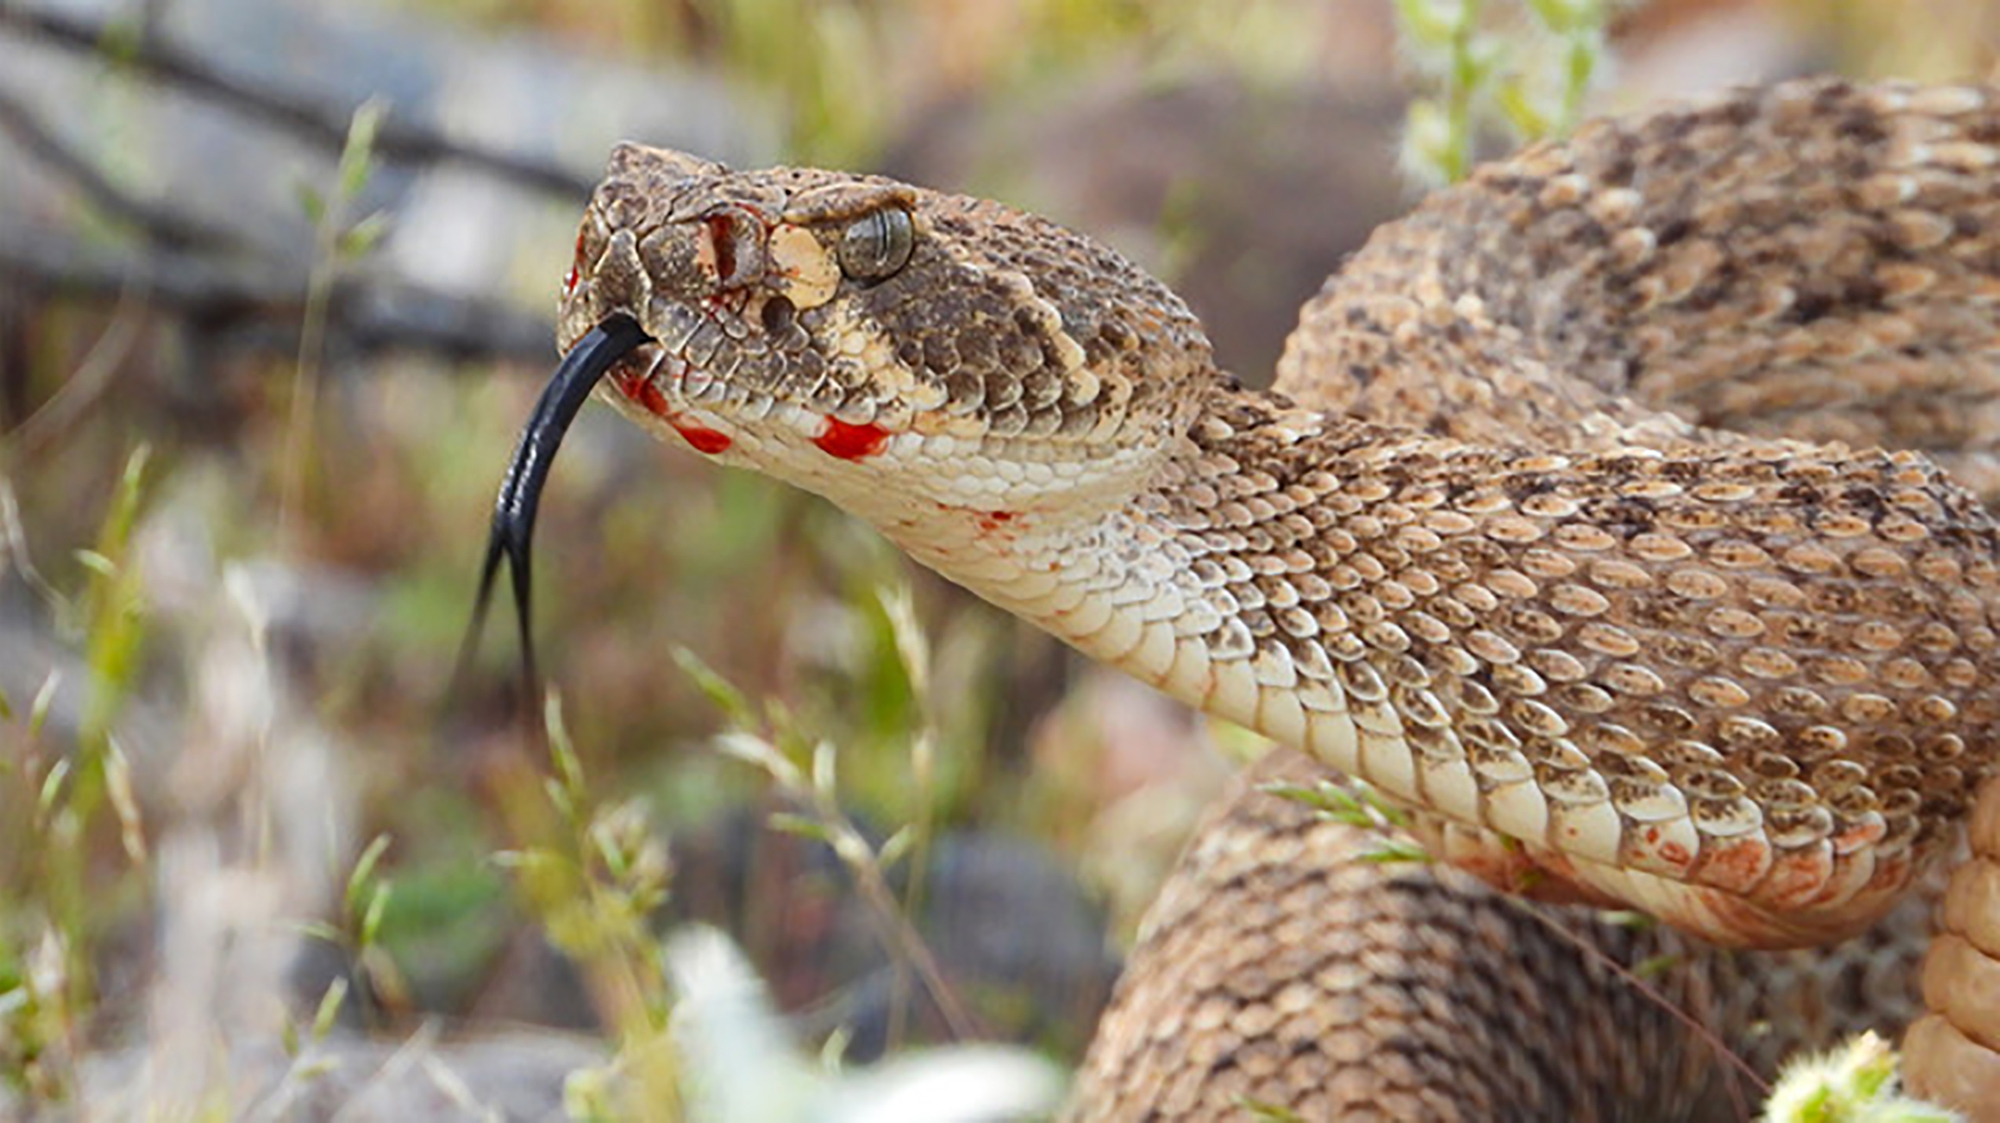 New Research Gives Insight Into Ideal Treatments for Snake Bites - Inspiring Animal Stories | VCA Voice 